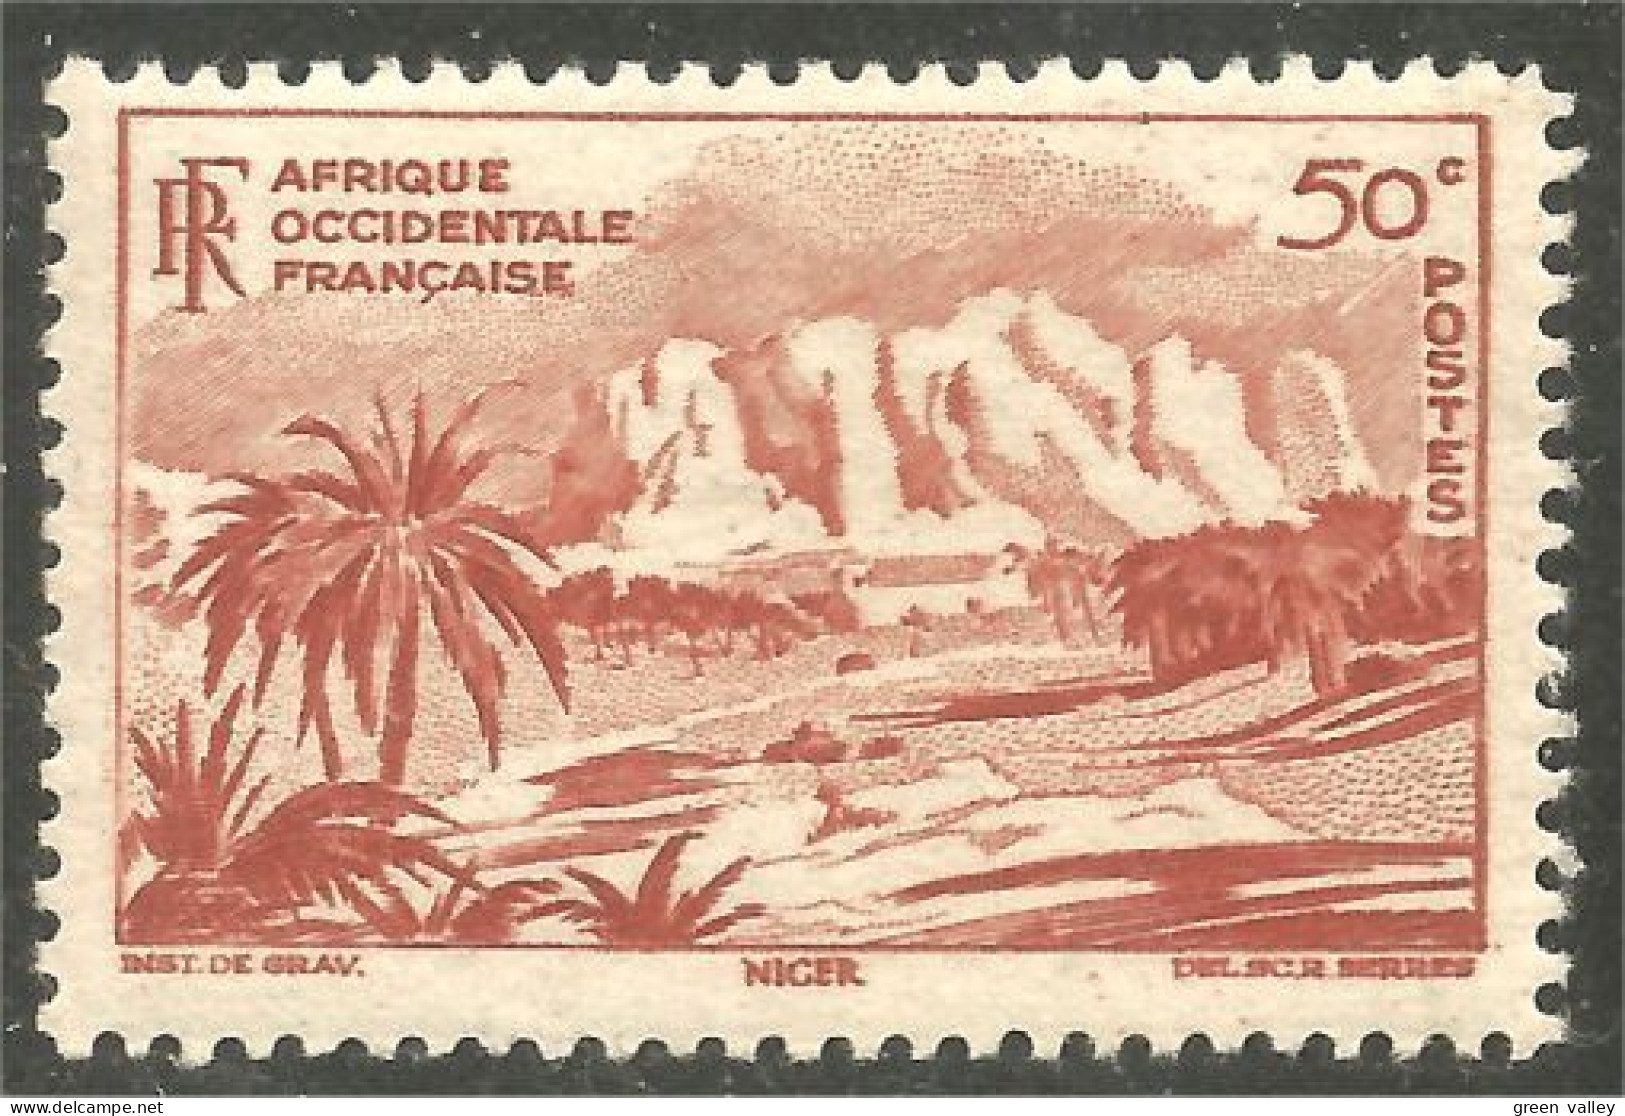 372 AOF Montagne Niger Mountain MH * Neuf (f3-AEF-368b) - Unused Stamps